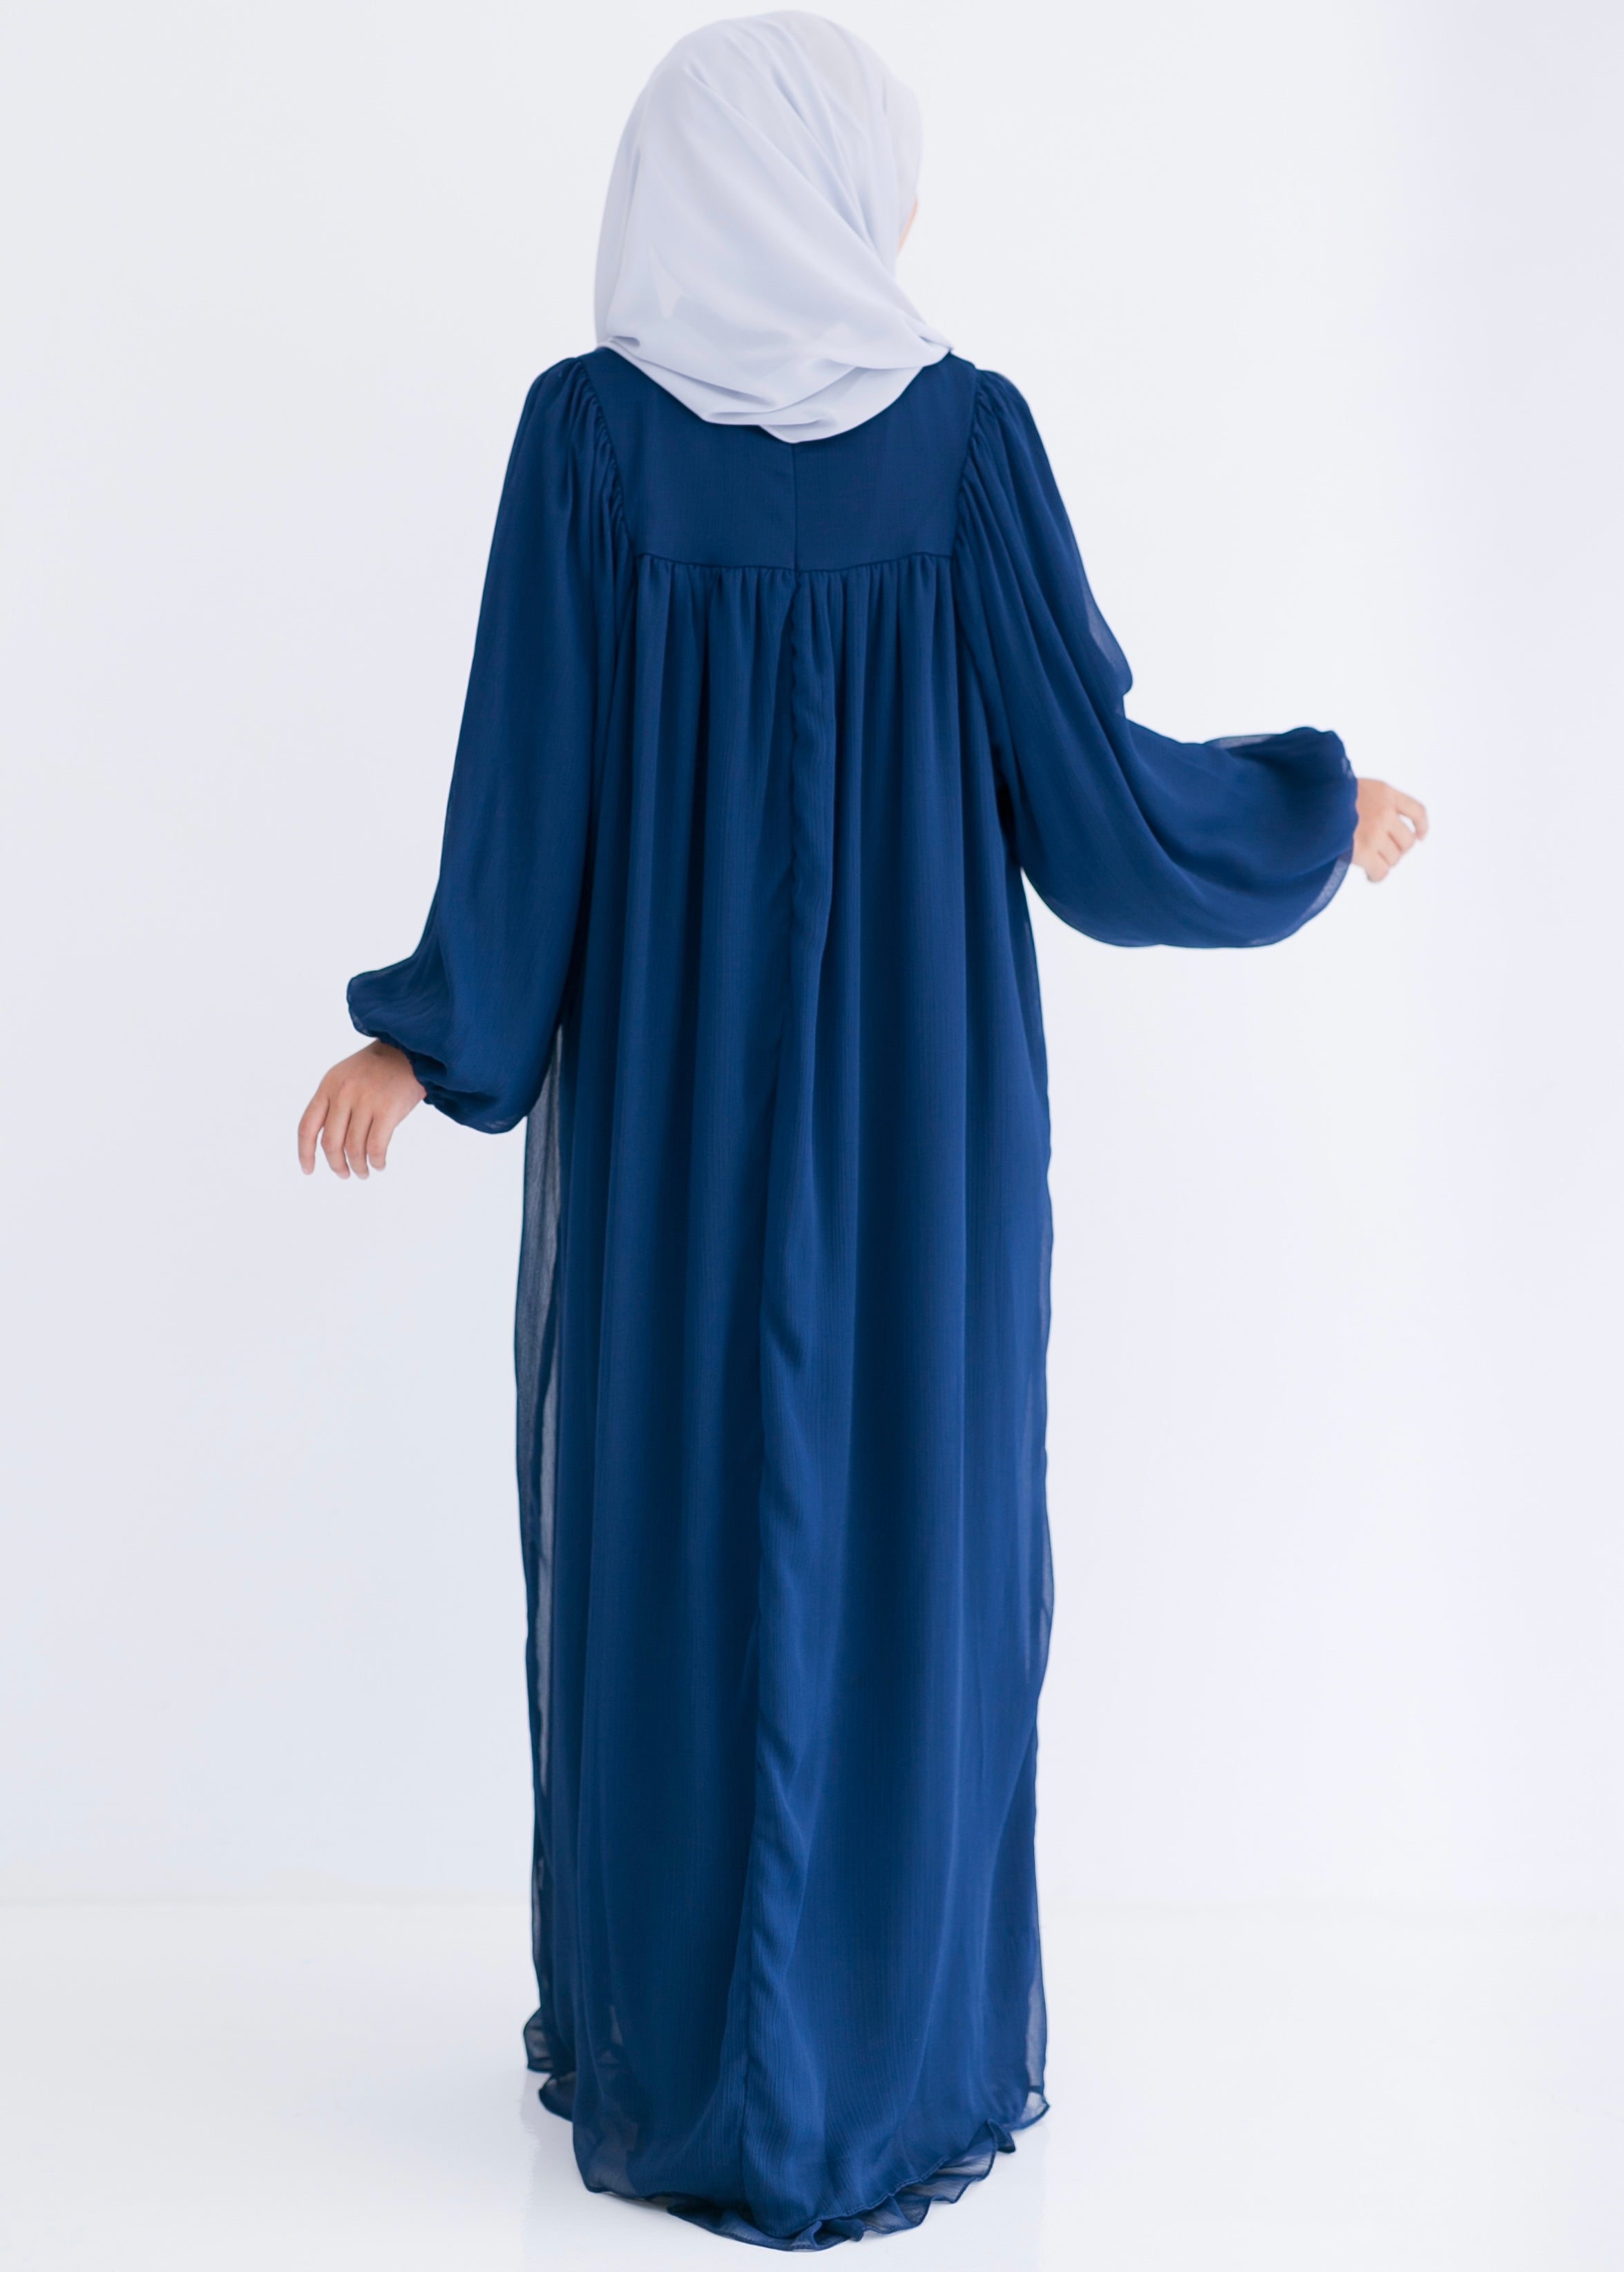 Victoria Long Dress in Navy Blue